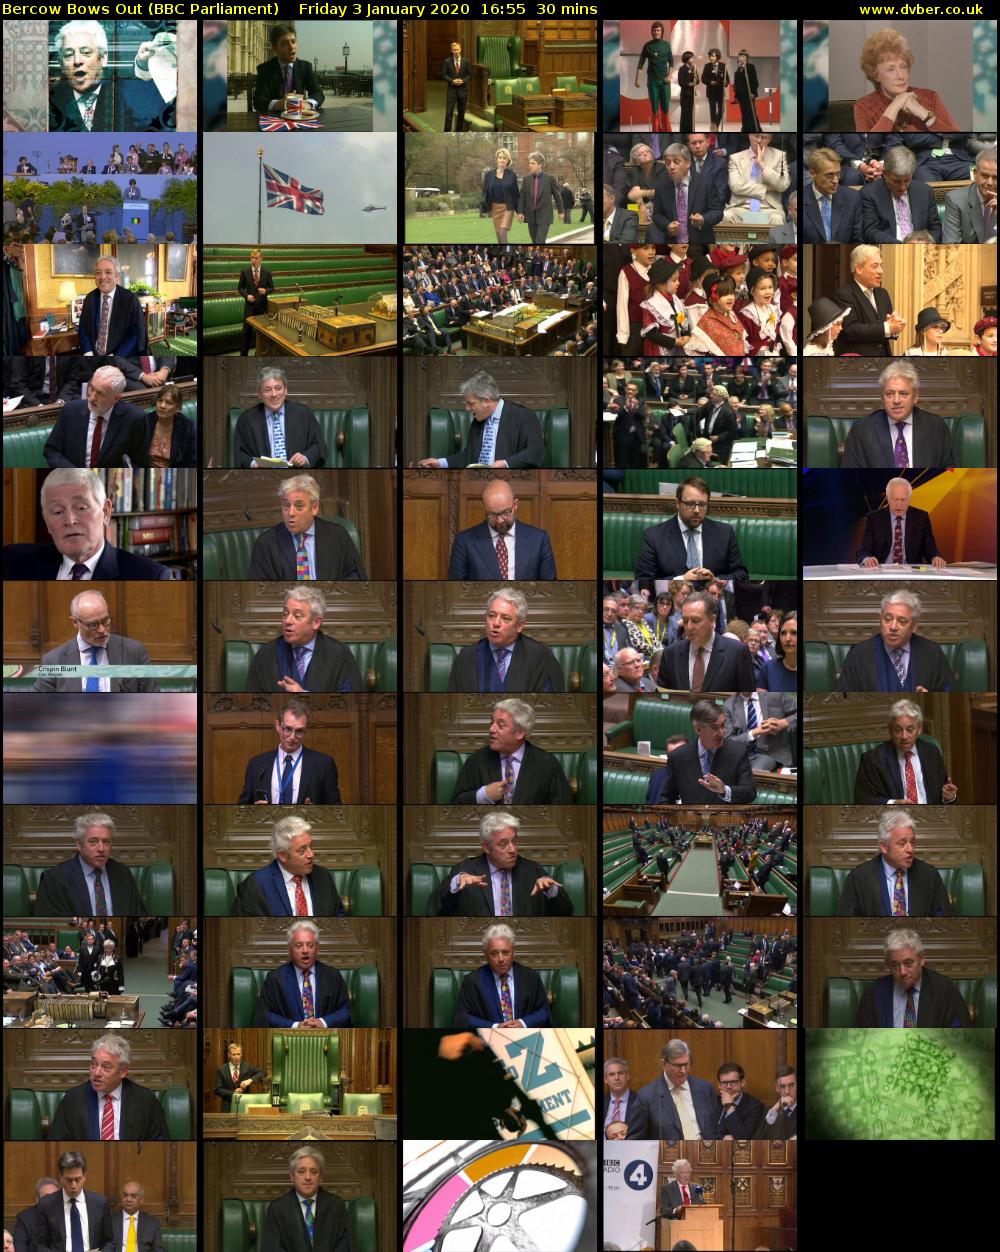 Bercow Bows Out (BBC Parliament) Friday 3 January 2020 16:55 - 17:25